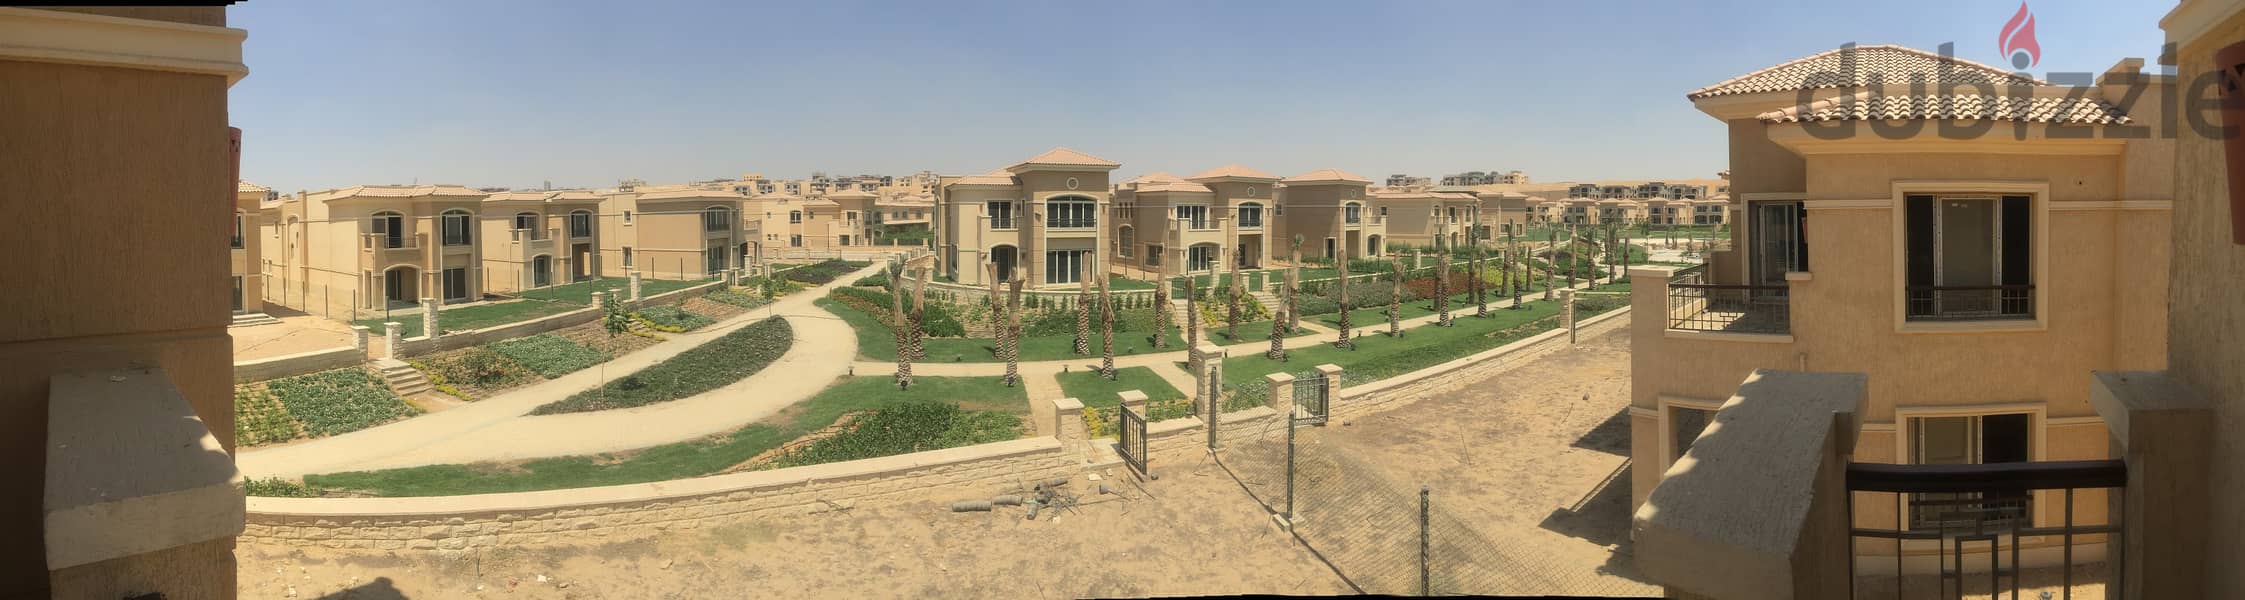 239 sqm villa for sale in Stone Park New Cairo, next to Mercedes agencies 5